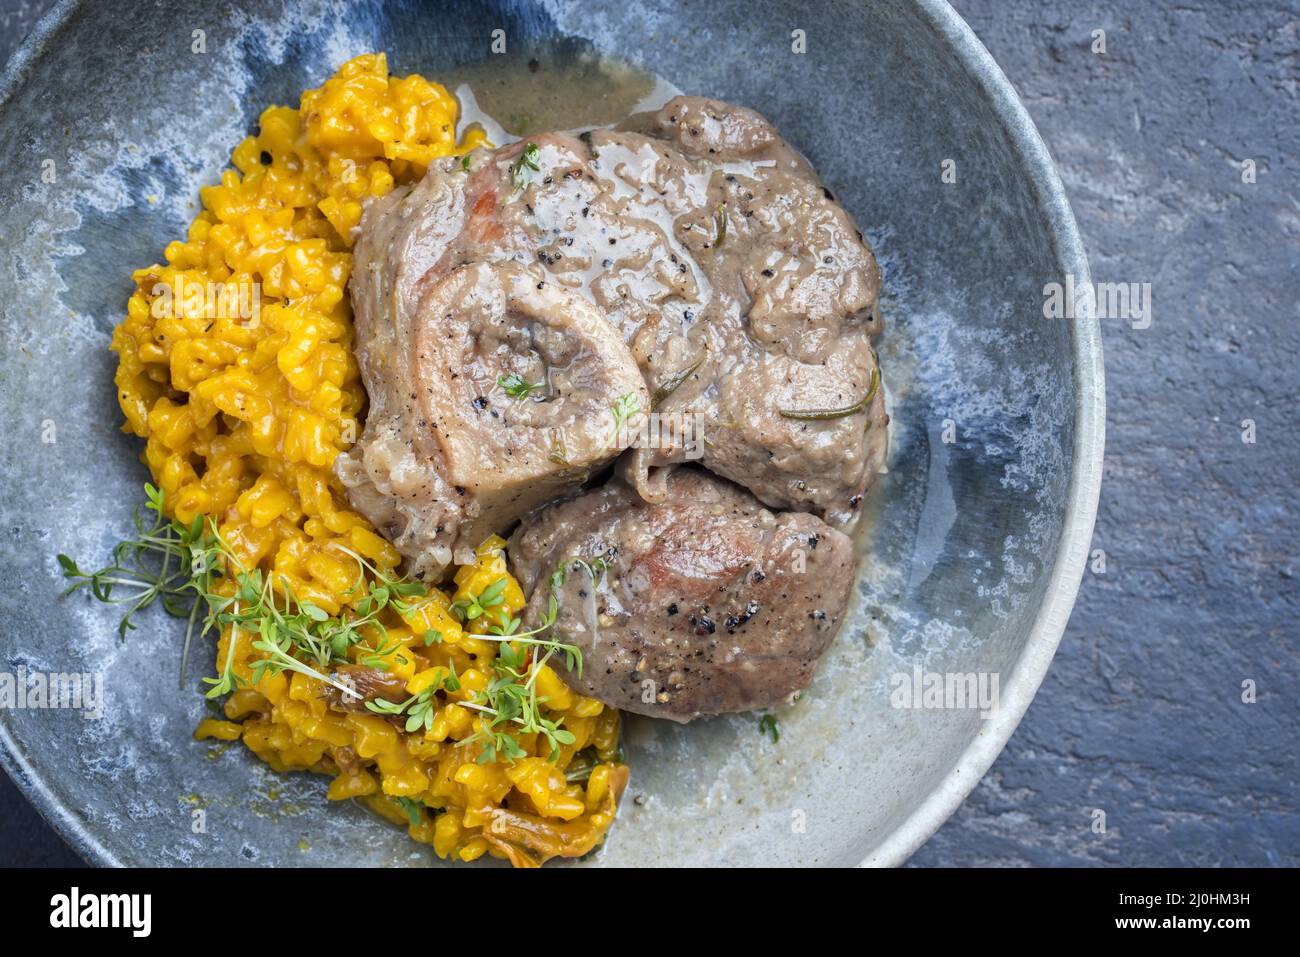 Modern style traditional braised Italian ossobuco alla Milanese with saffron risotto and baby broccoli in white wine meat sauce Stock Photo